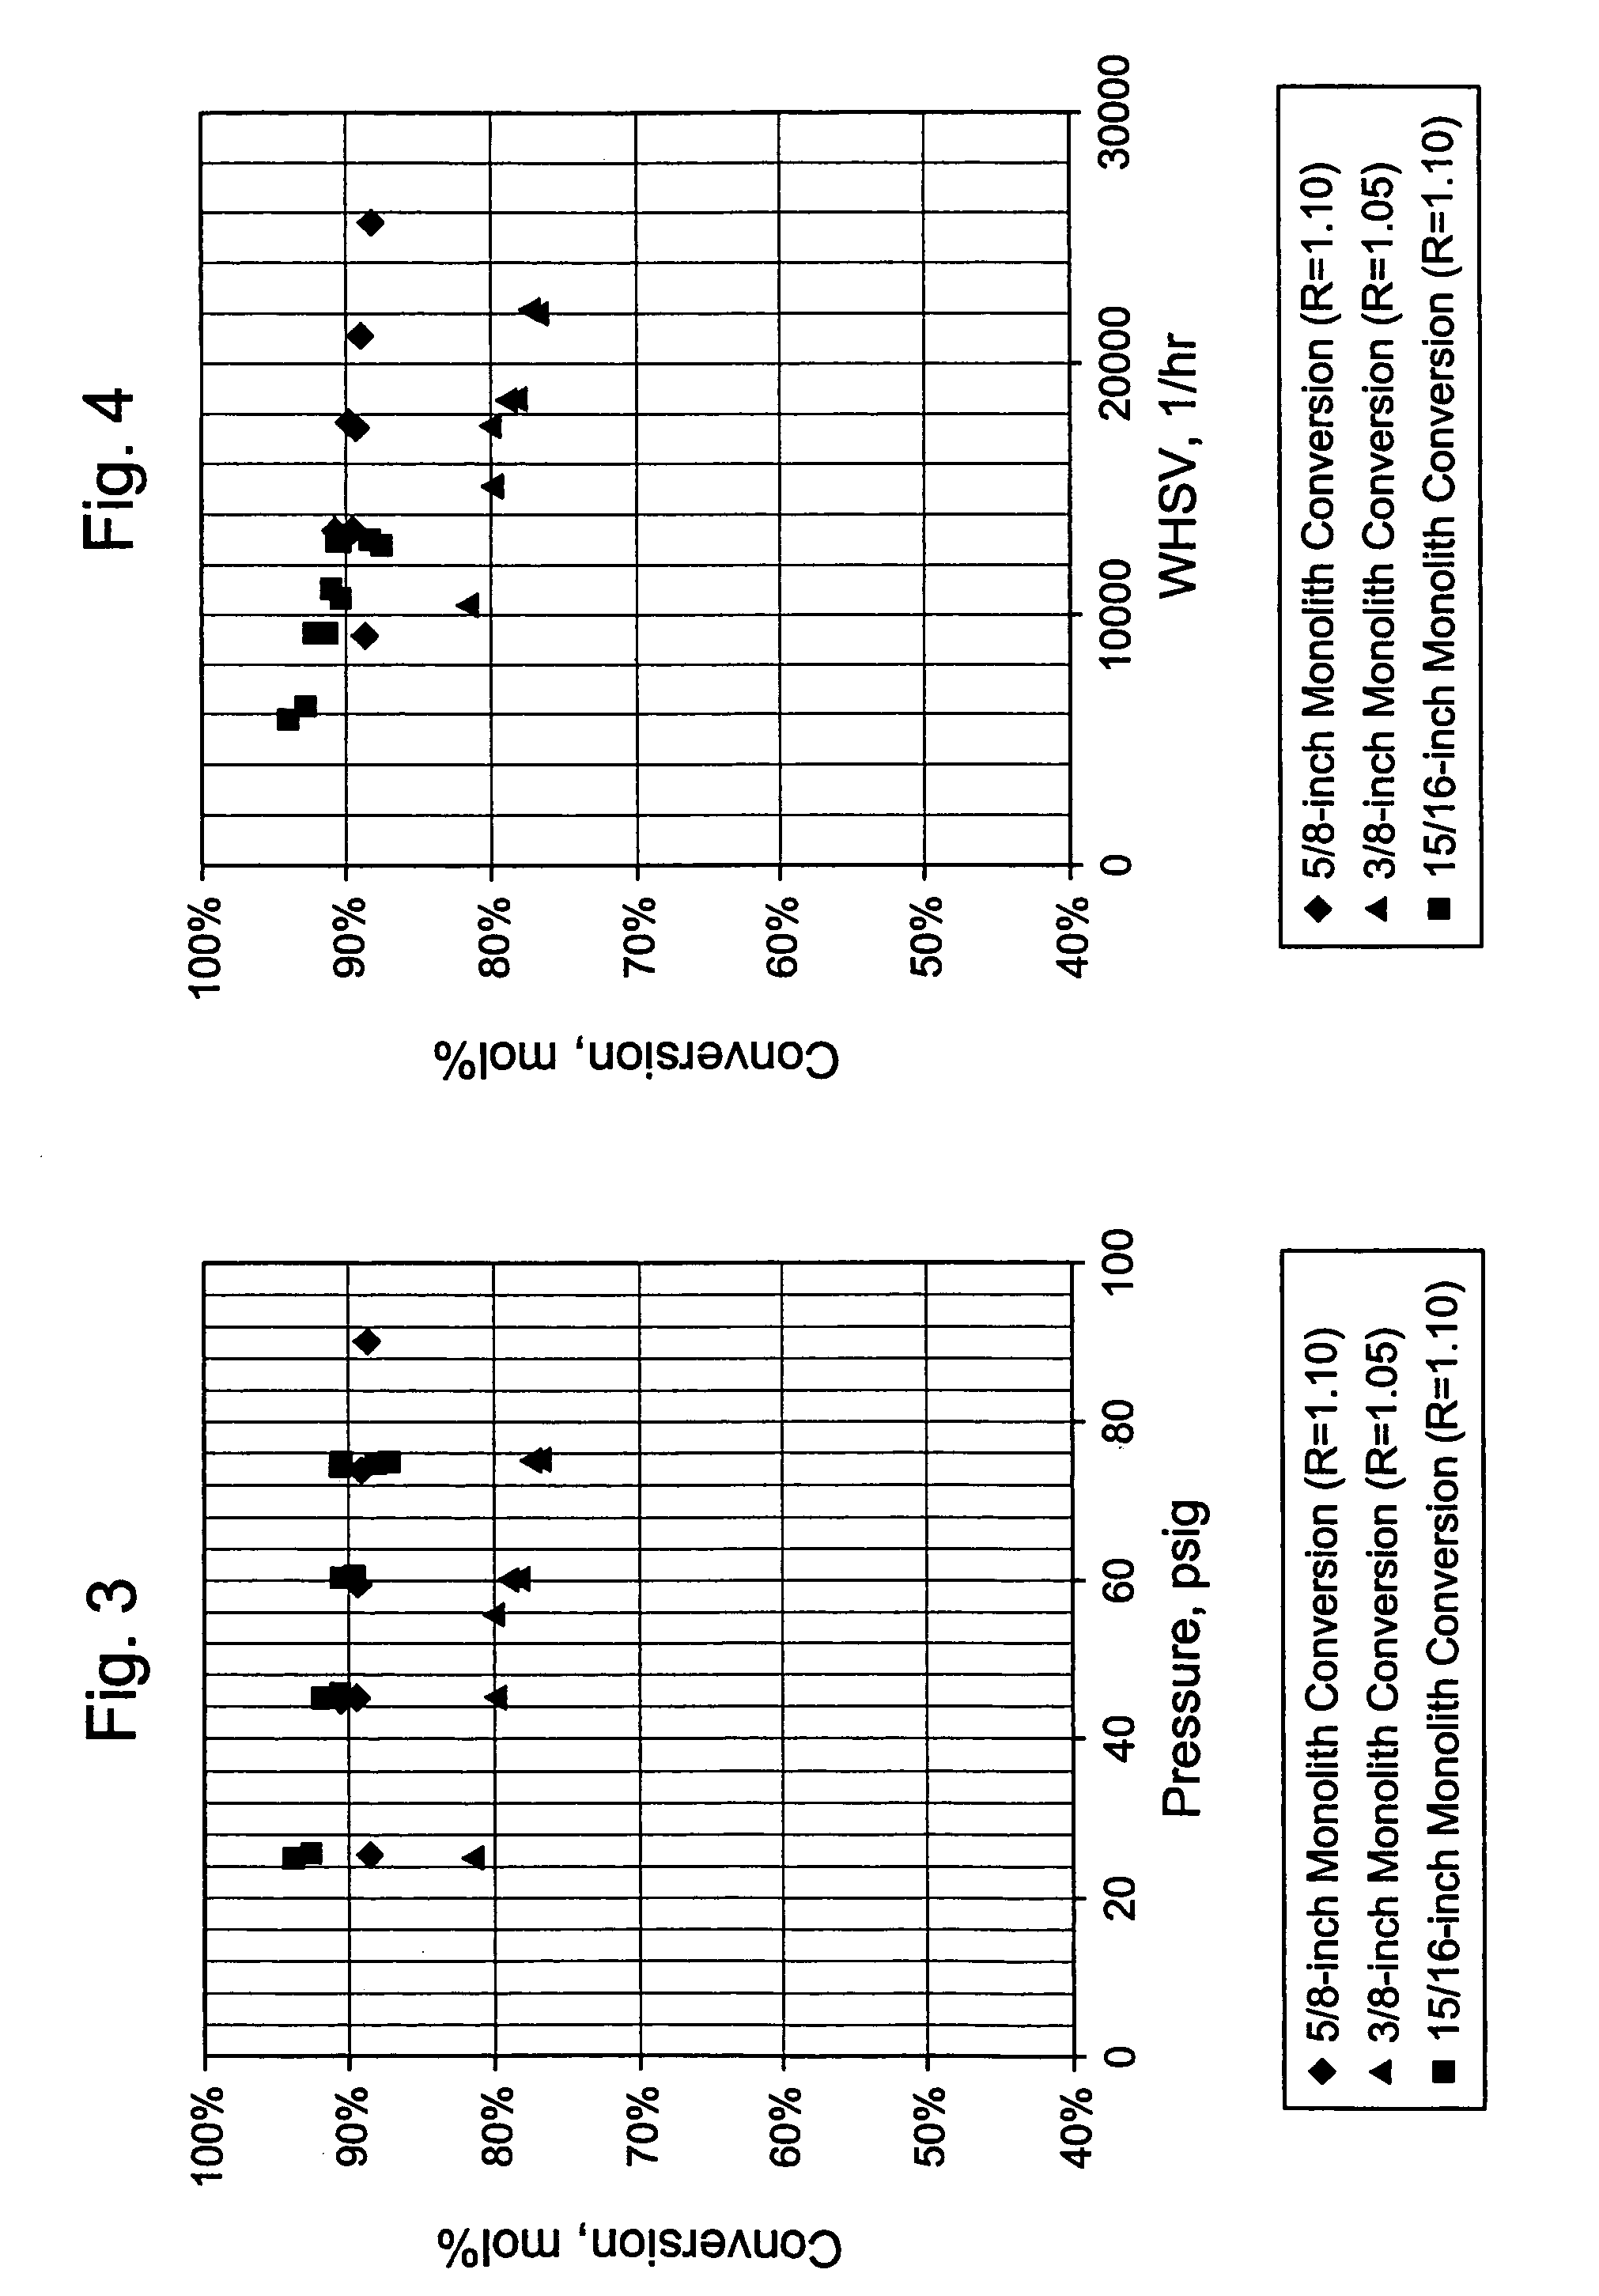 Catalyst system for enhanced flow syngas production